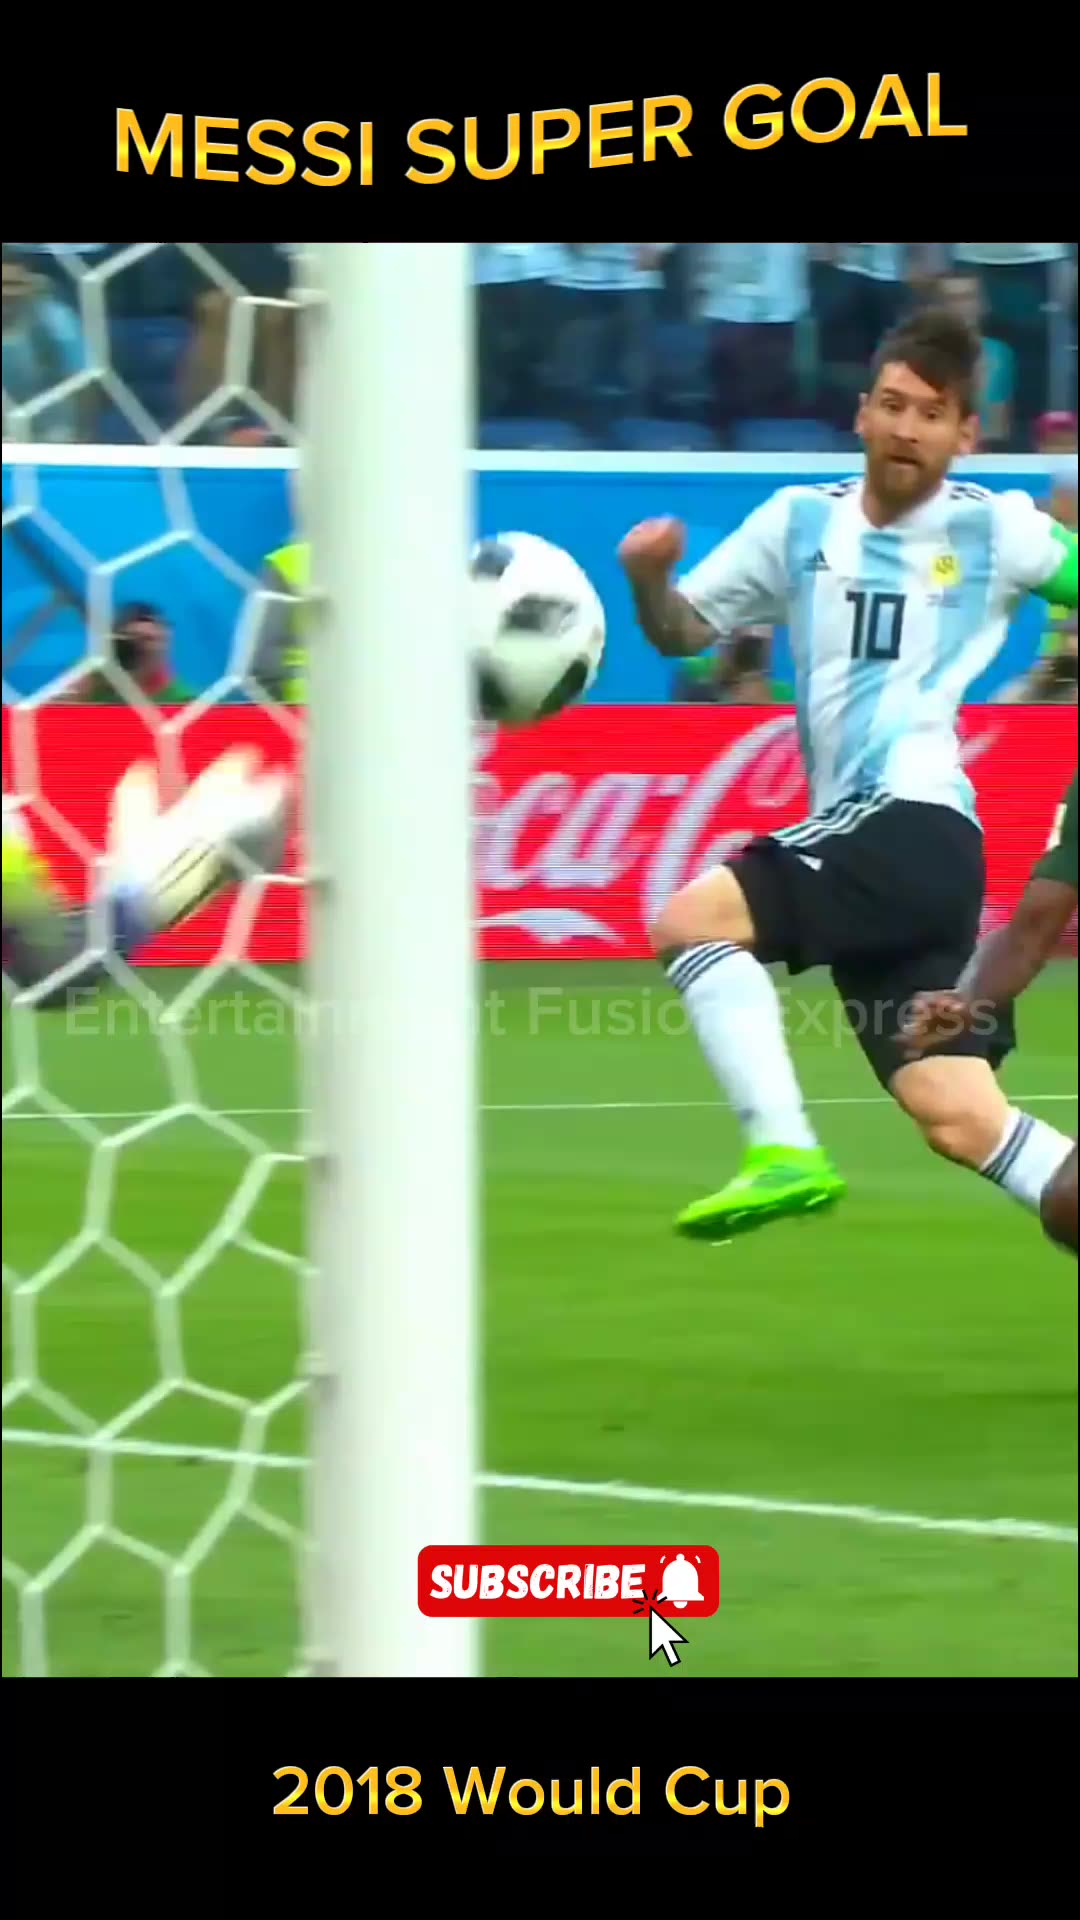 Messi super goal of 2018 world cup